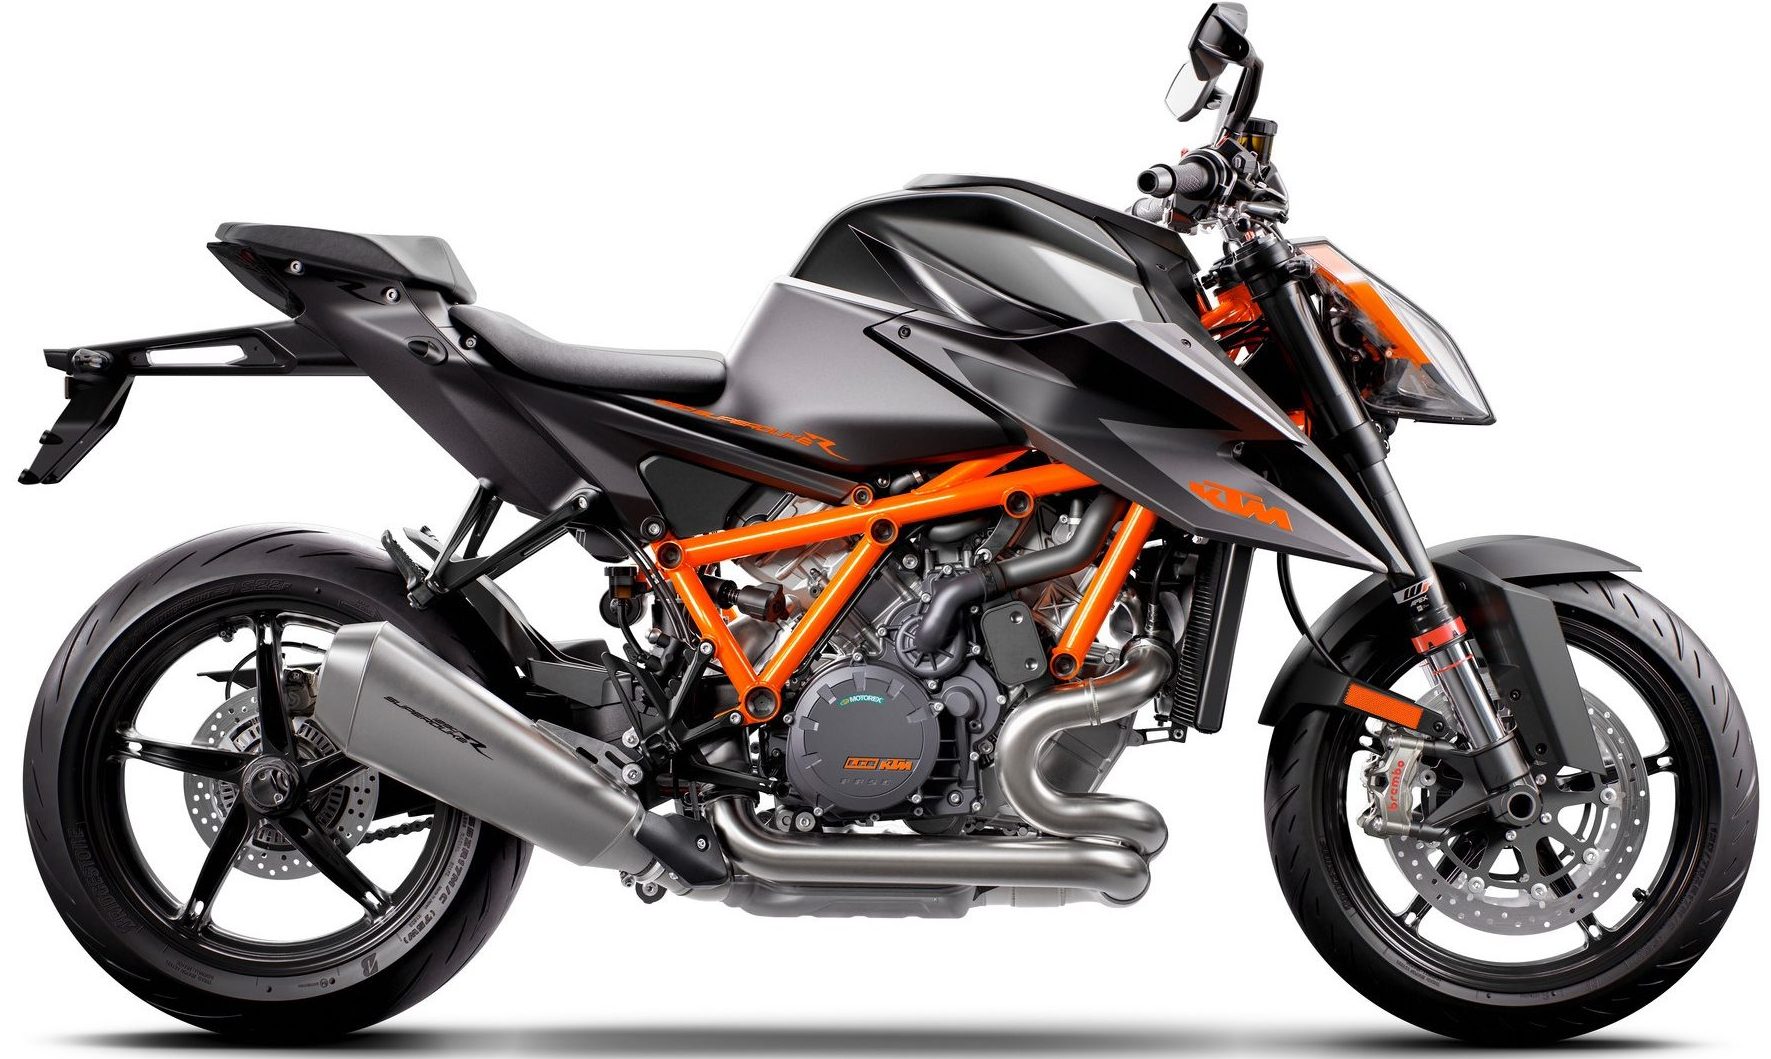 KTM 1290 Super Duke R Not Coming to India Anytime Soon - foreground